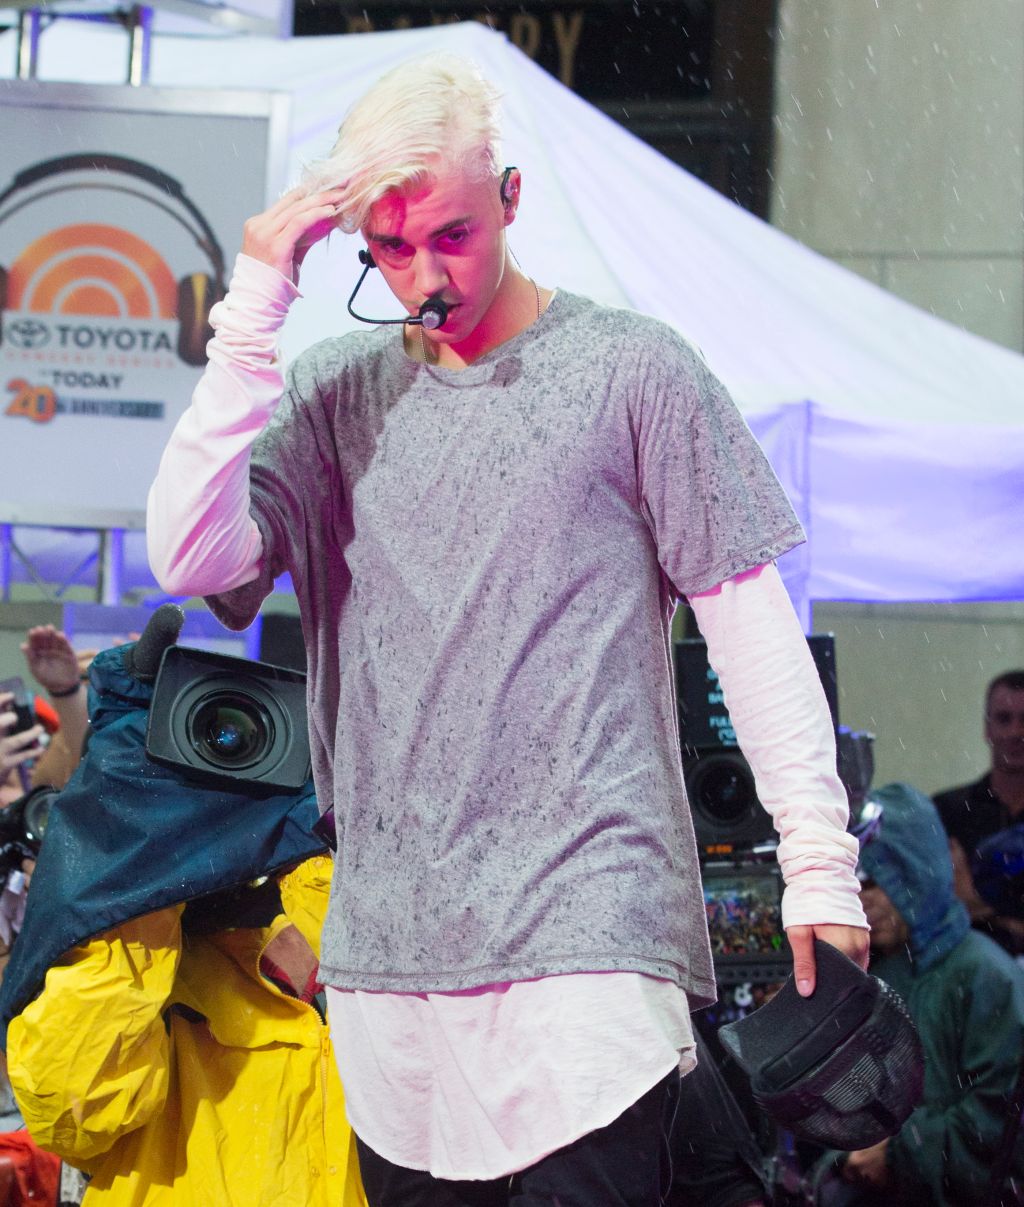 Justin Bieber on Today Show